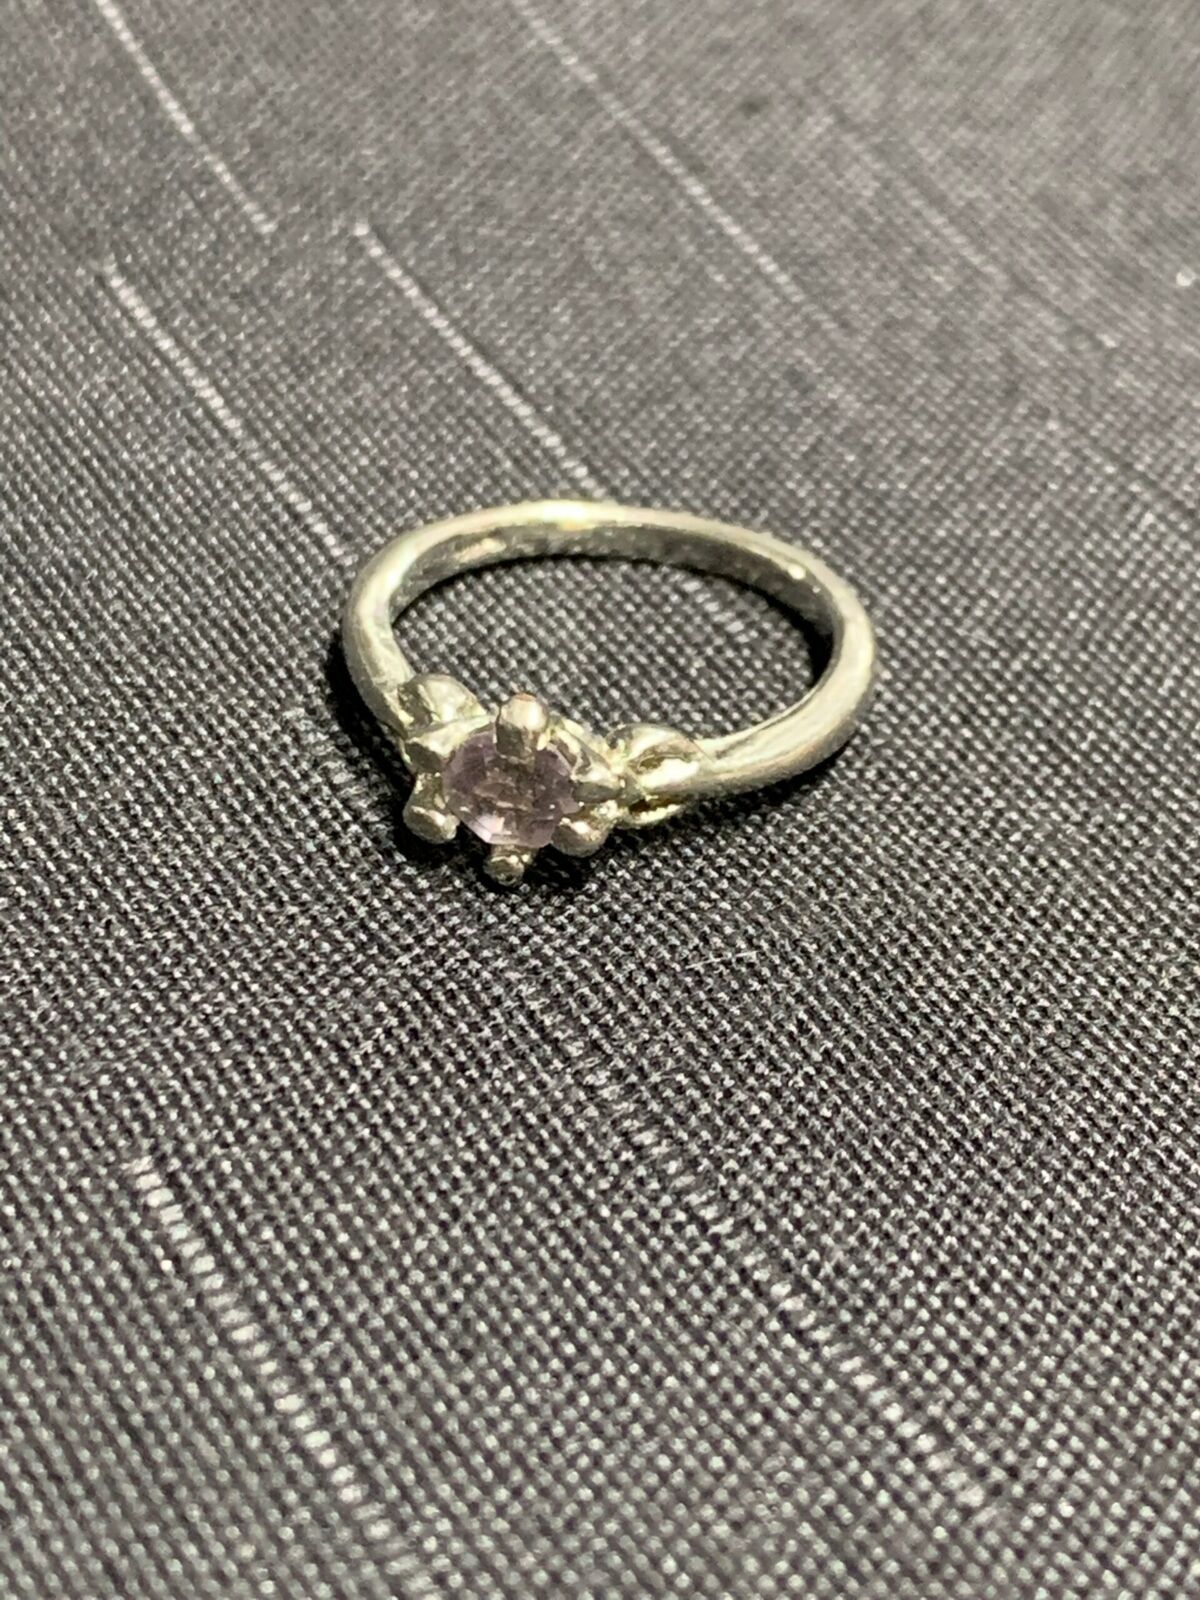 SILVER RING - WITH PURPLE STONE SETTING